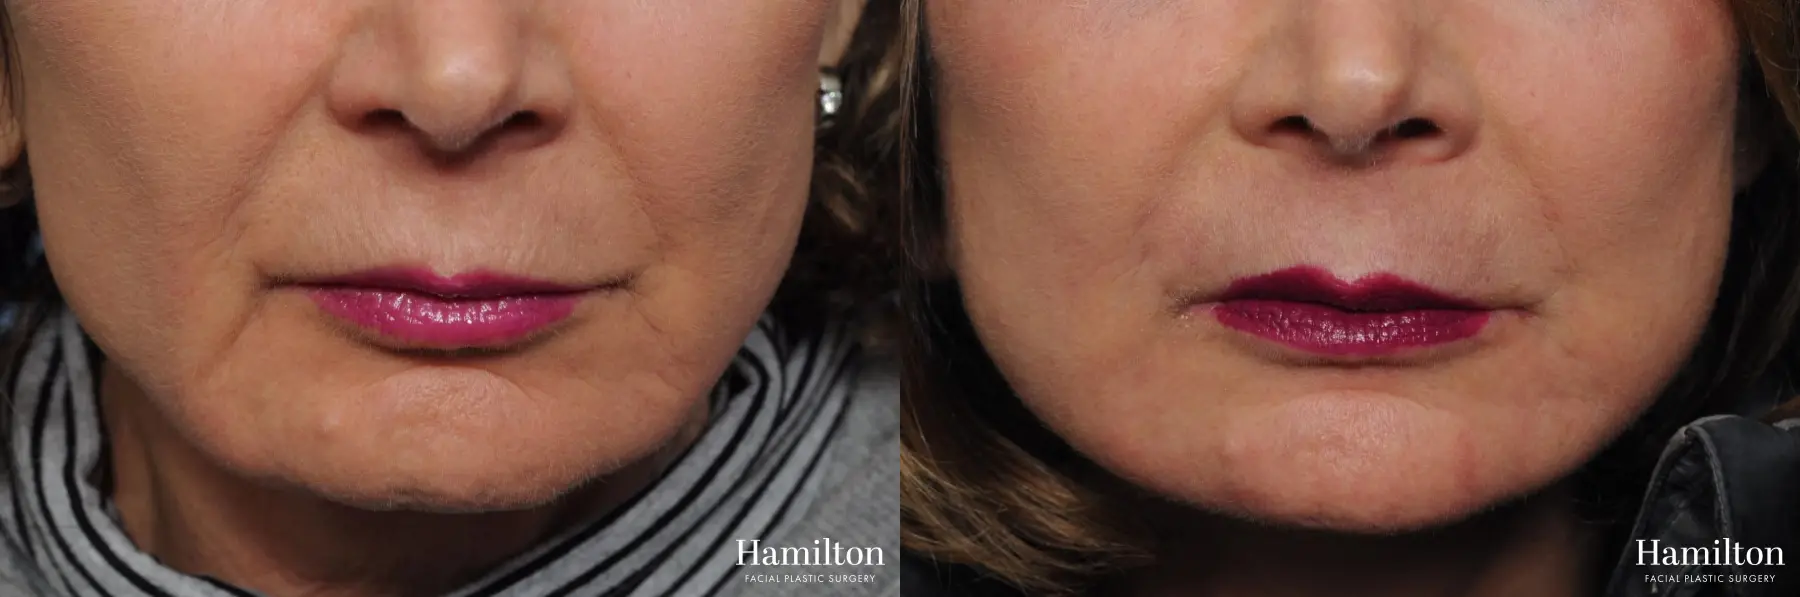 Sciton Laser: Patient 2 - Before and After  